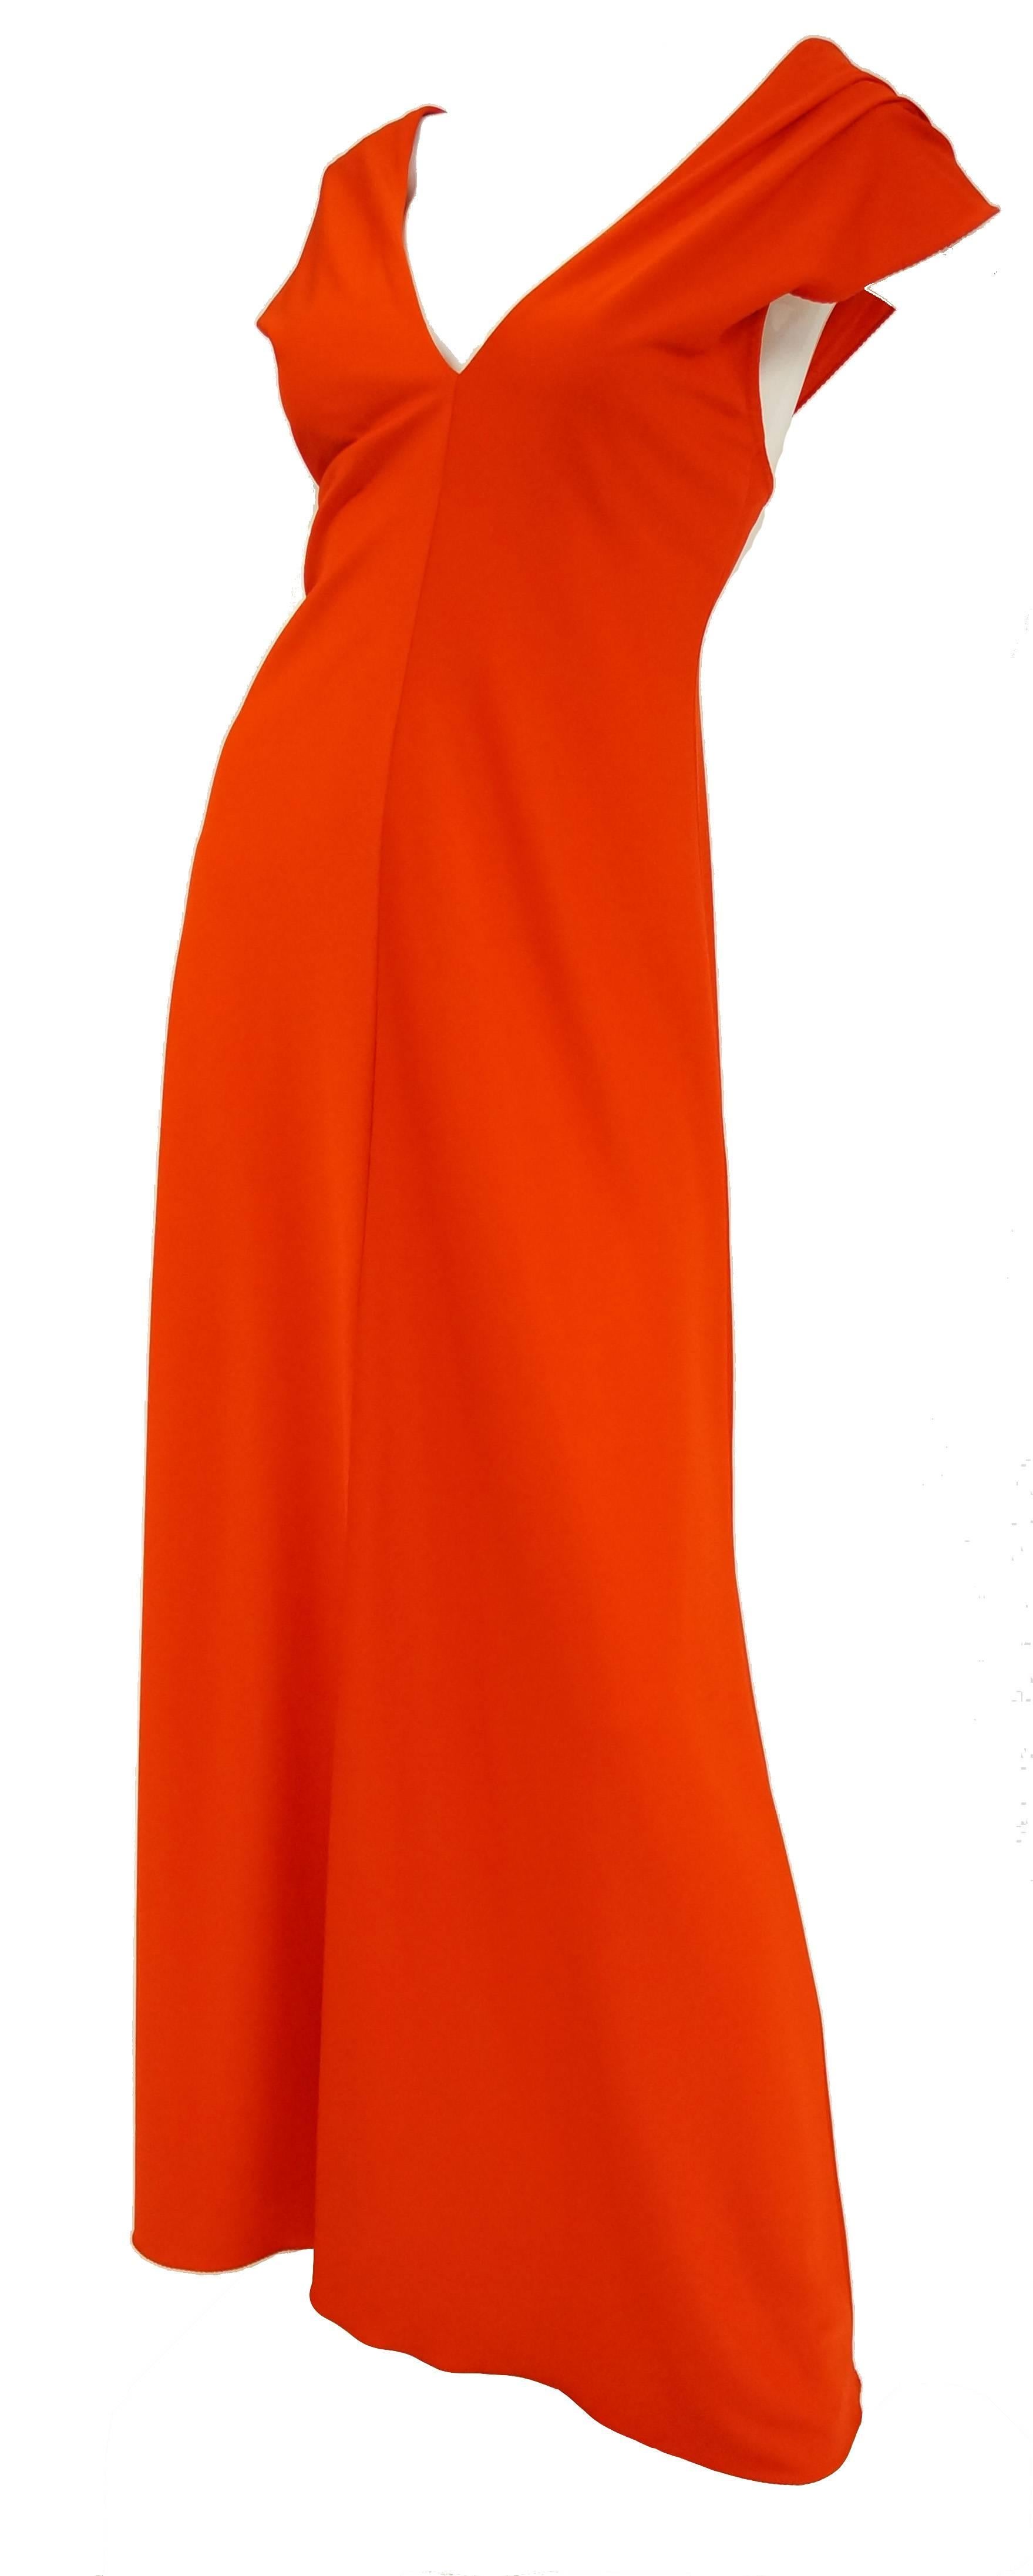 
Gorgeous! This dress is an excellent testament to Stephen Burrow’s bold use of color and distinct, dramatic draping. The floor - length dress is composed of a bright red - orange jersey knit wear fabric, and has an accent center seam running the